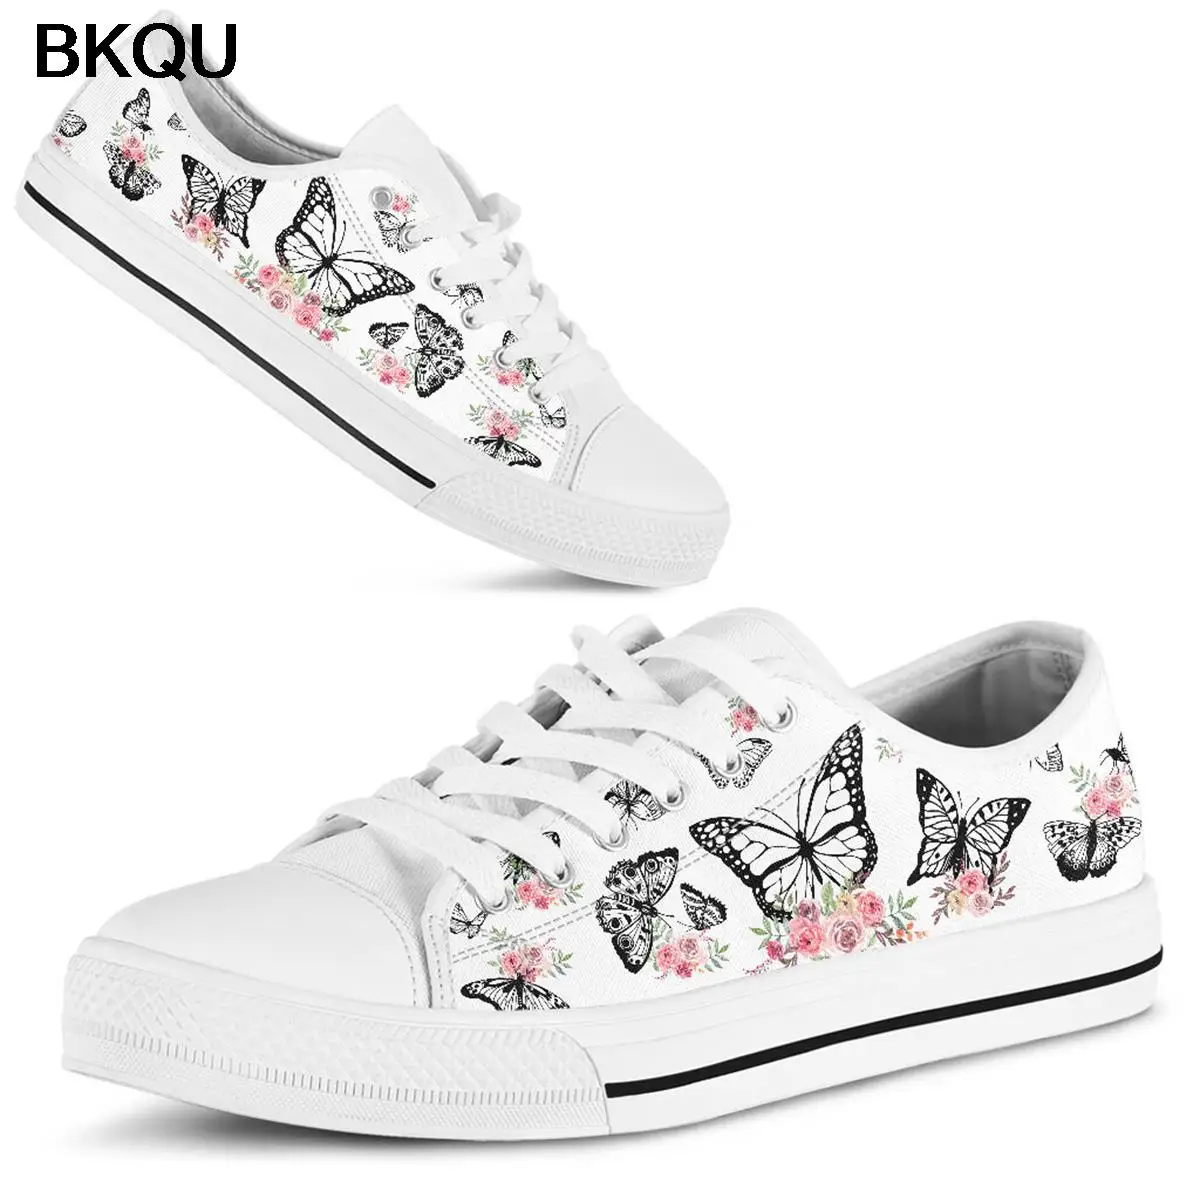 

BKQU Women Breathable Shoes New Light Lace up Flat Ladies Sketch Butterfly Casual Shoes White Canvas Sneakers